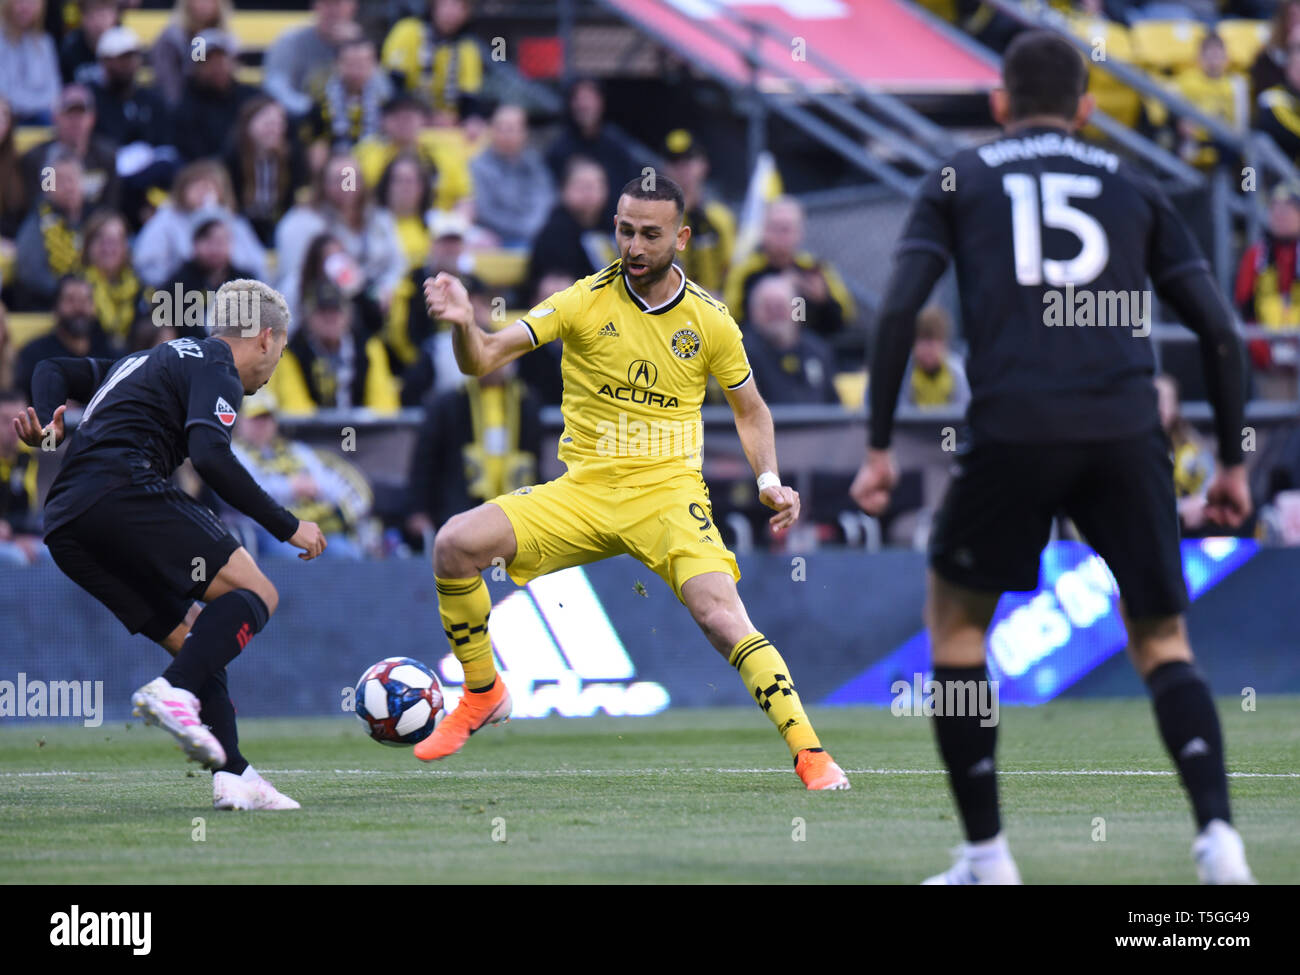 Columbus, OH, USA. 24th Apr, 2019. April 24, 2019: Columbus Crew forward Justin Meram (9) attempts to field the ball during the MLS match between DC United and Columbus Crew SC at Mapfre Stadium in Columbus, Ohio. Austyn McFadden/ZUMA Credit: Austyn McFadden/ZUMA Wire/Alamy Live News Stock Photo